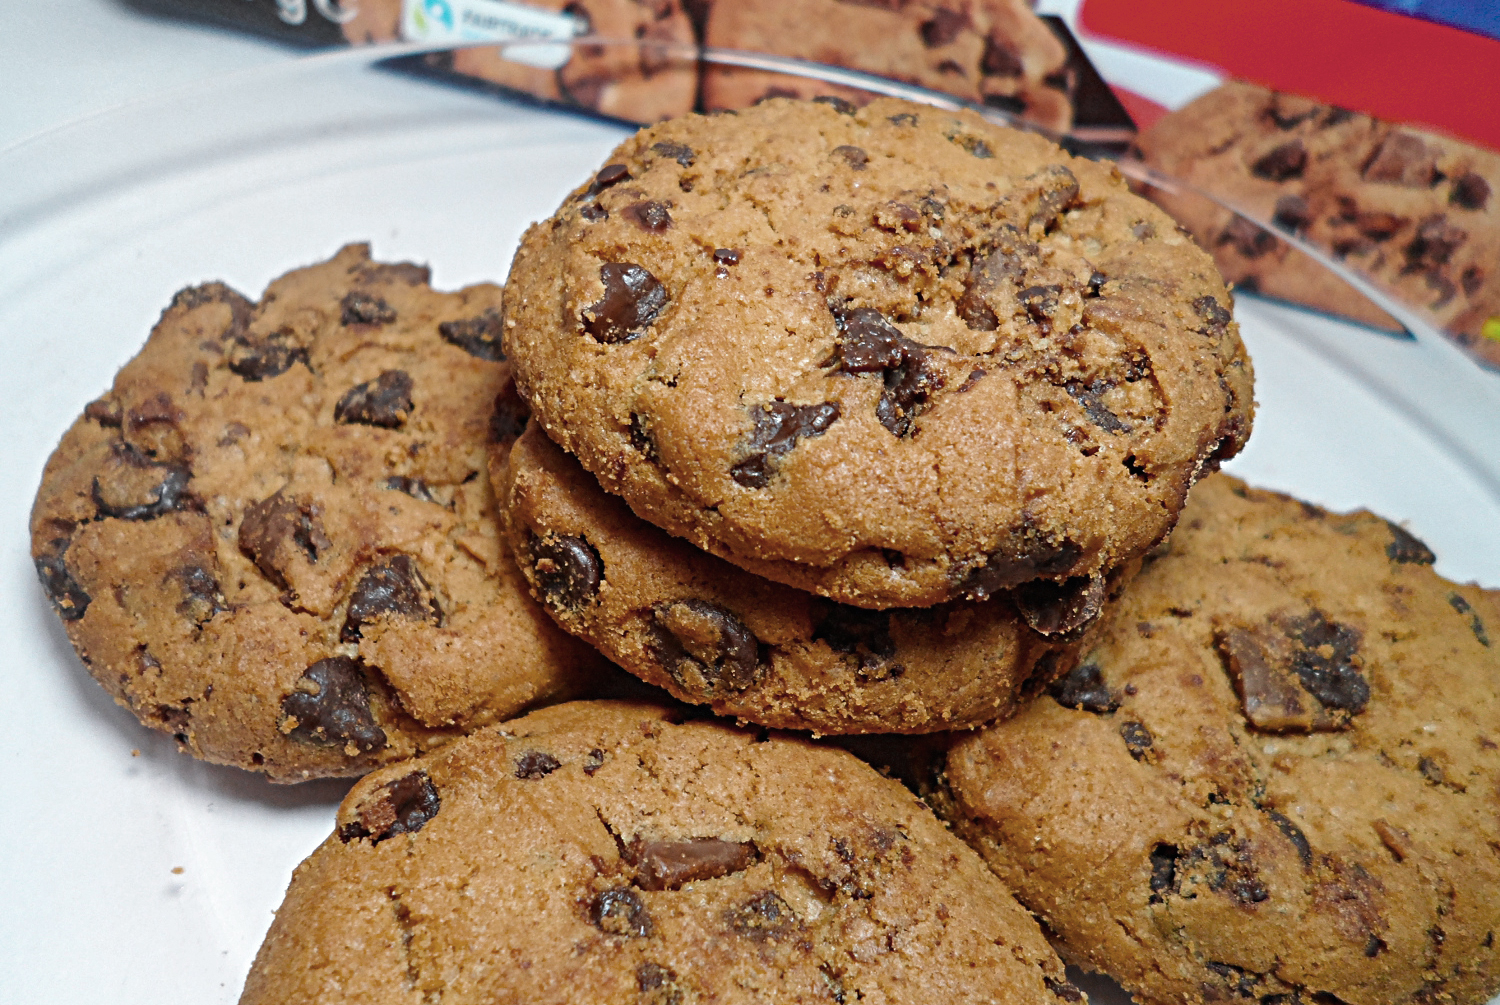 the classic American chocolate cookies, filled with chocolate chips